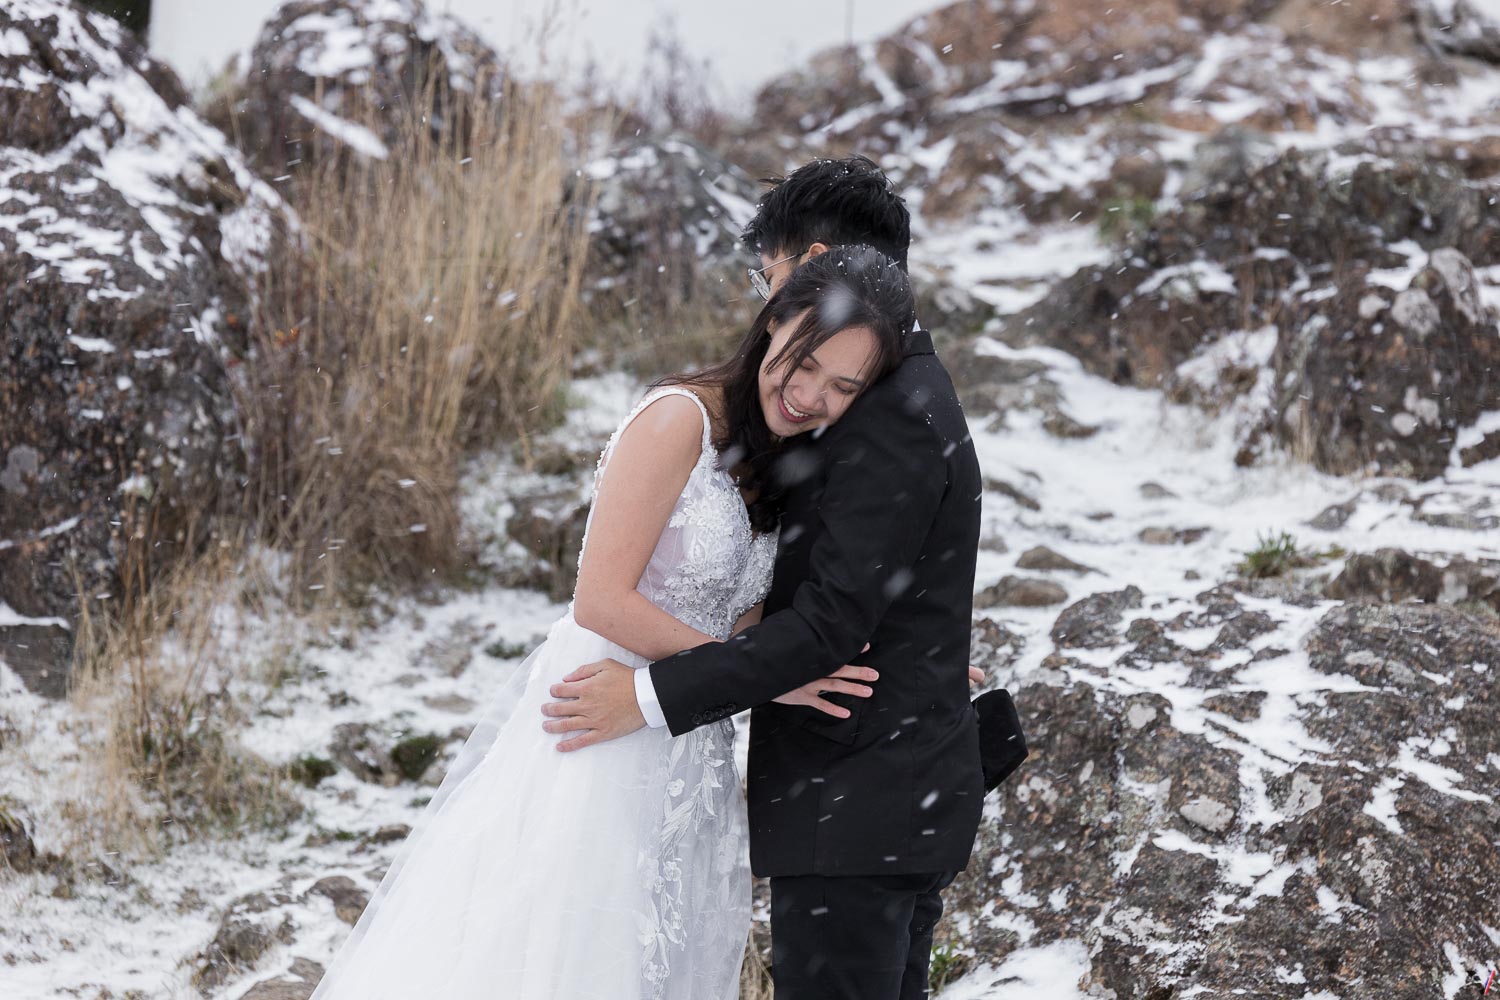 A portrait with the bride and groom on the snow